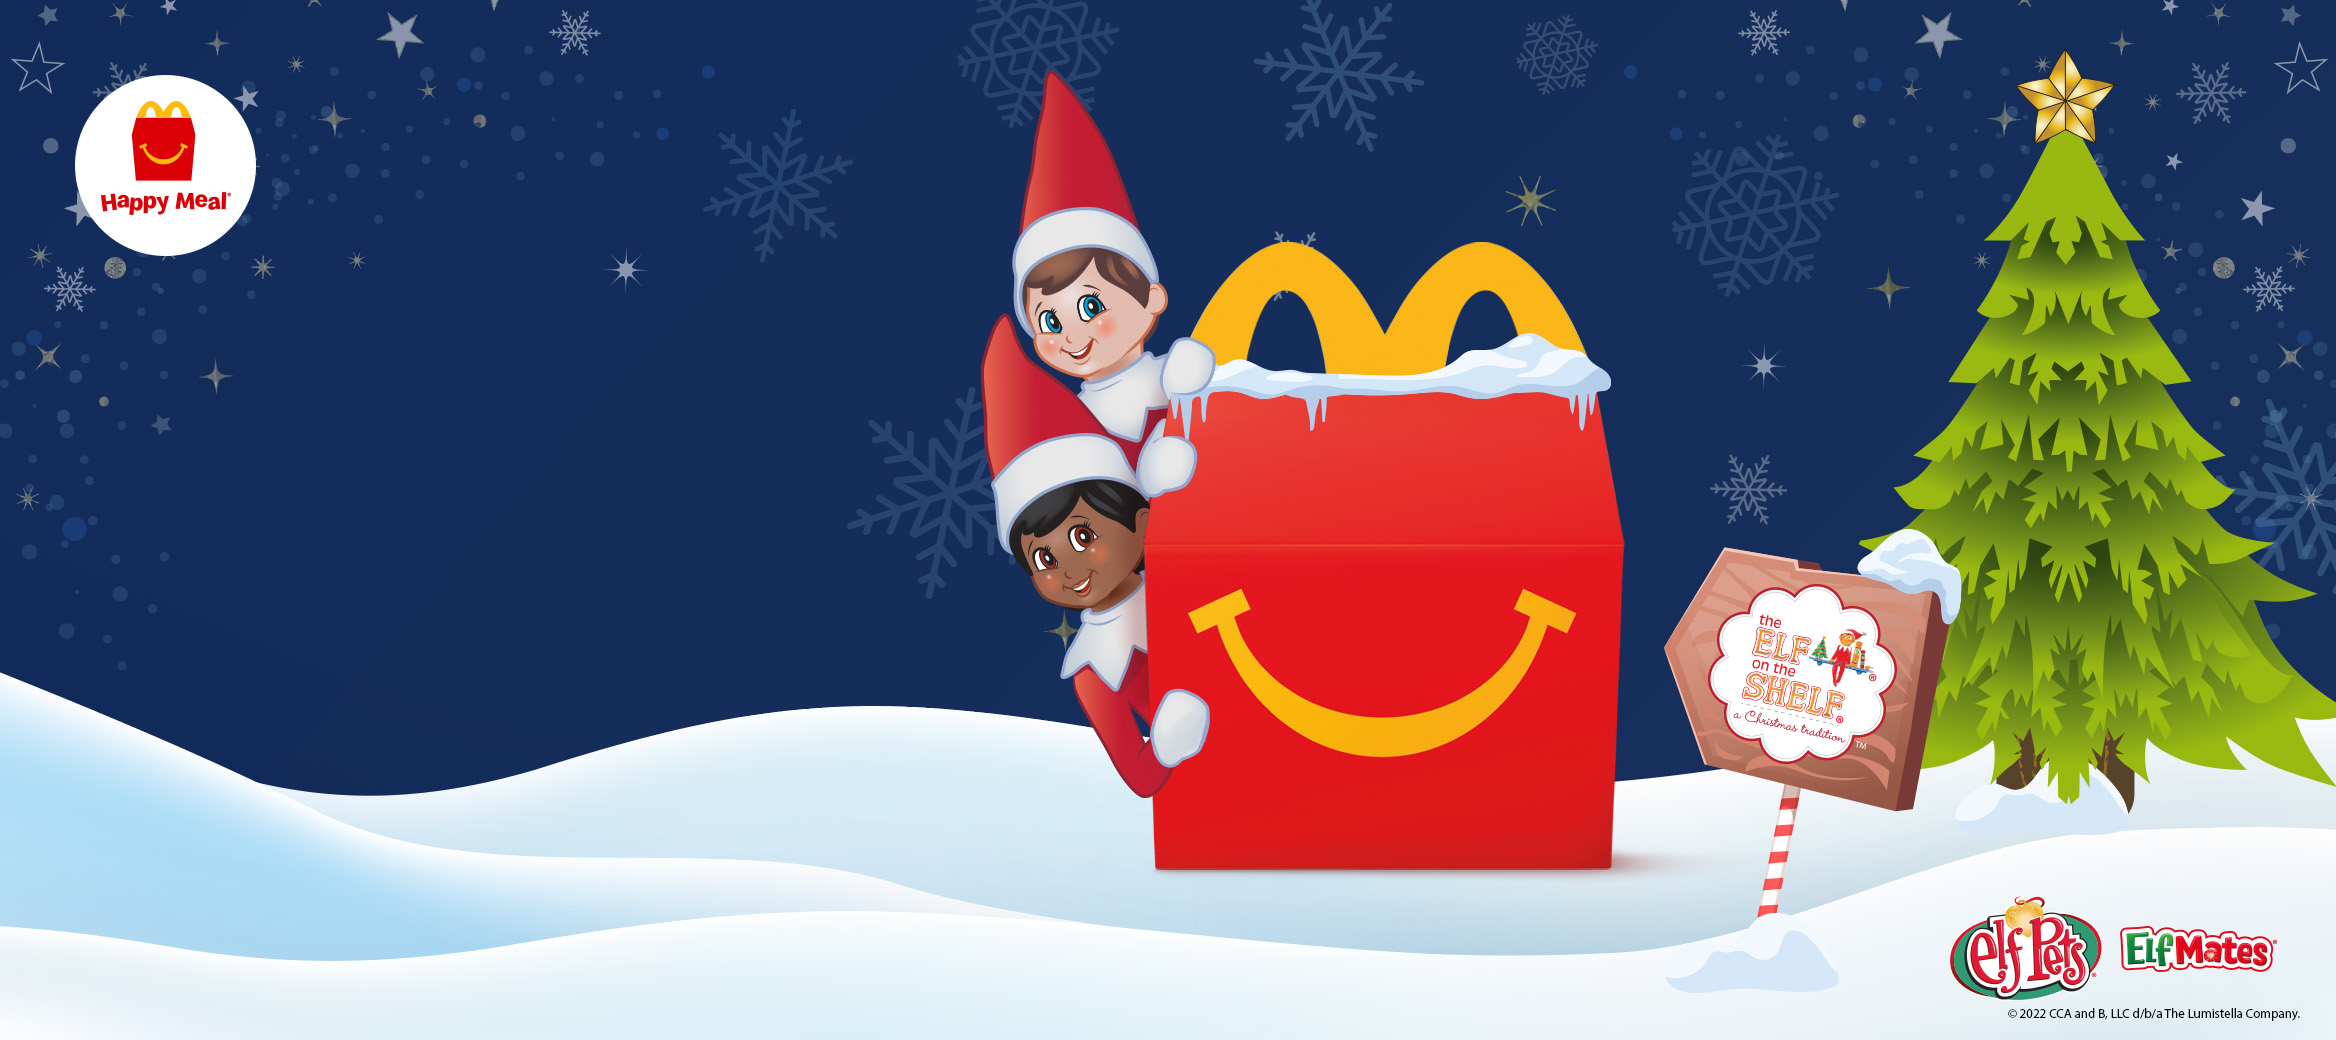 Happy Meal box with two Elf Mates hiding behind it, a Christmas tree and snow.